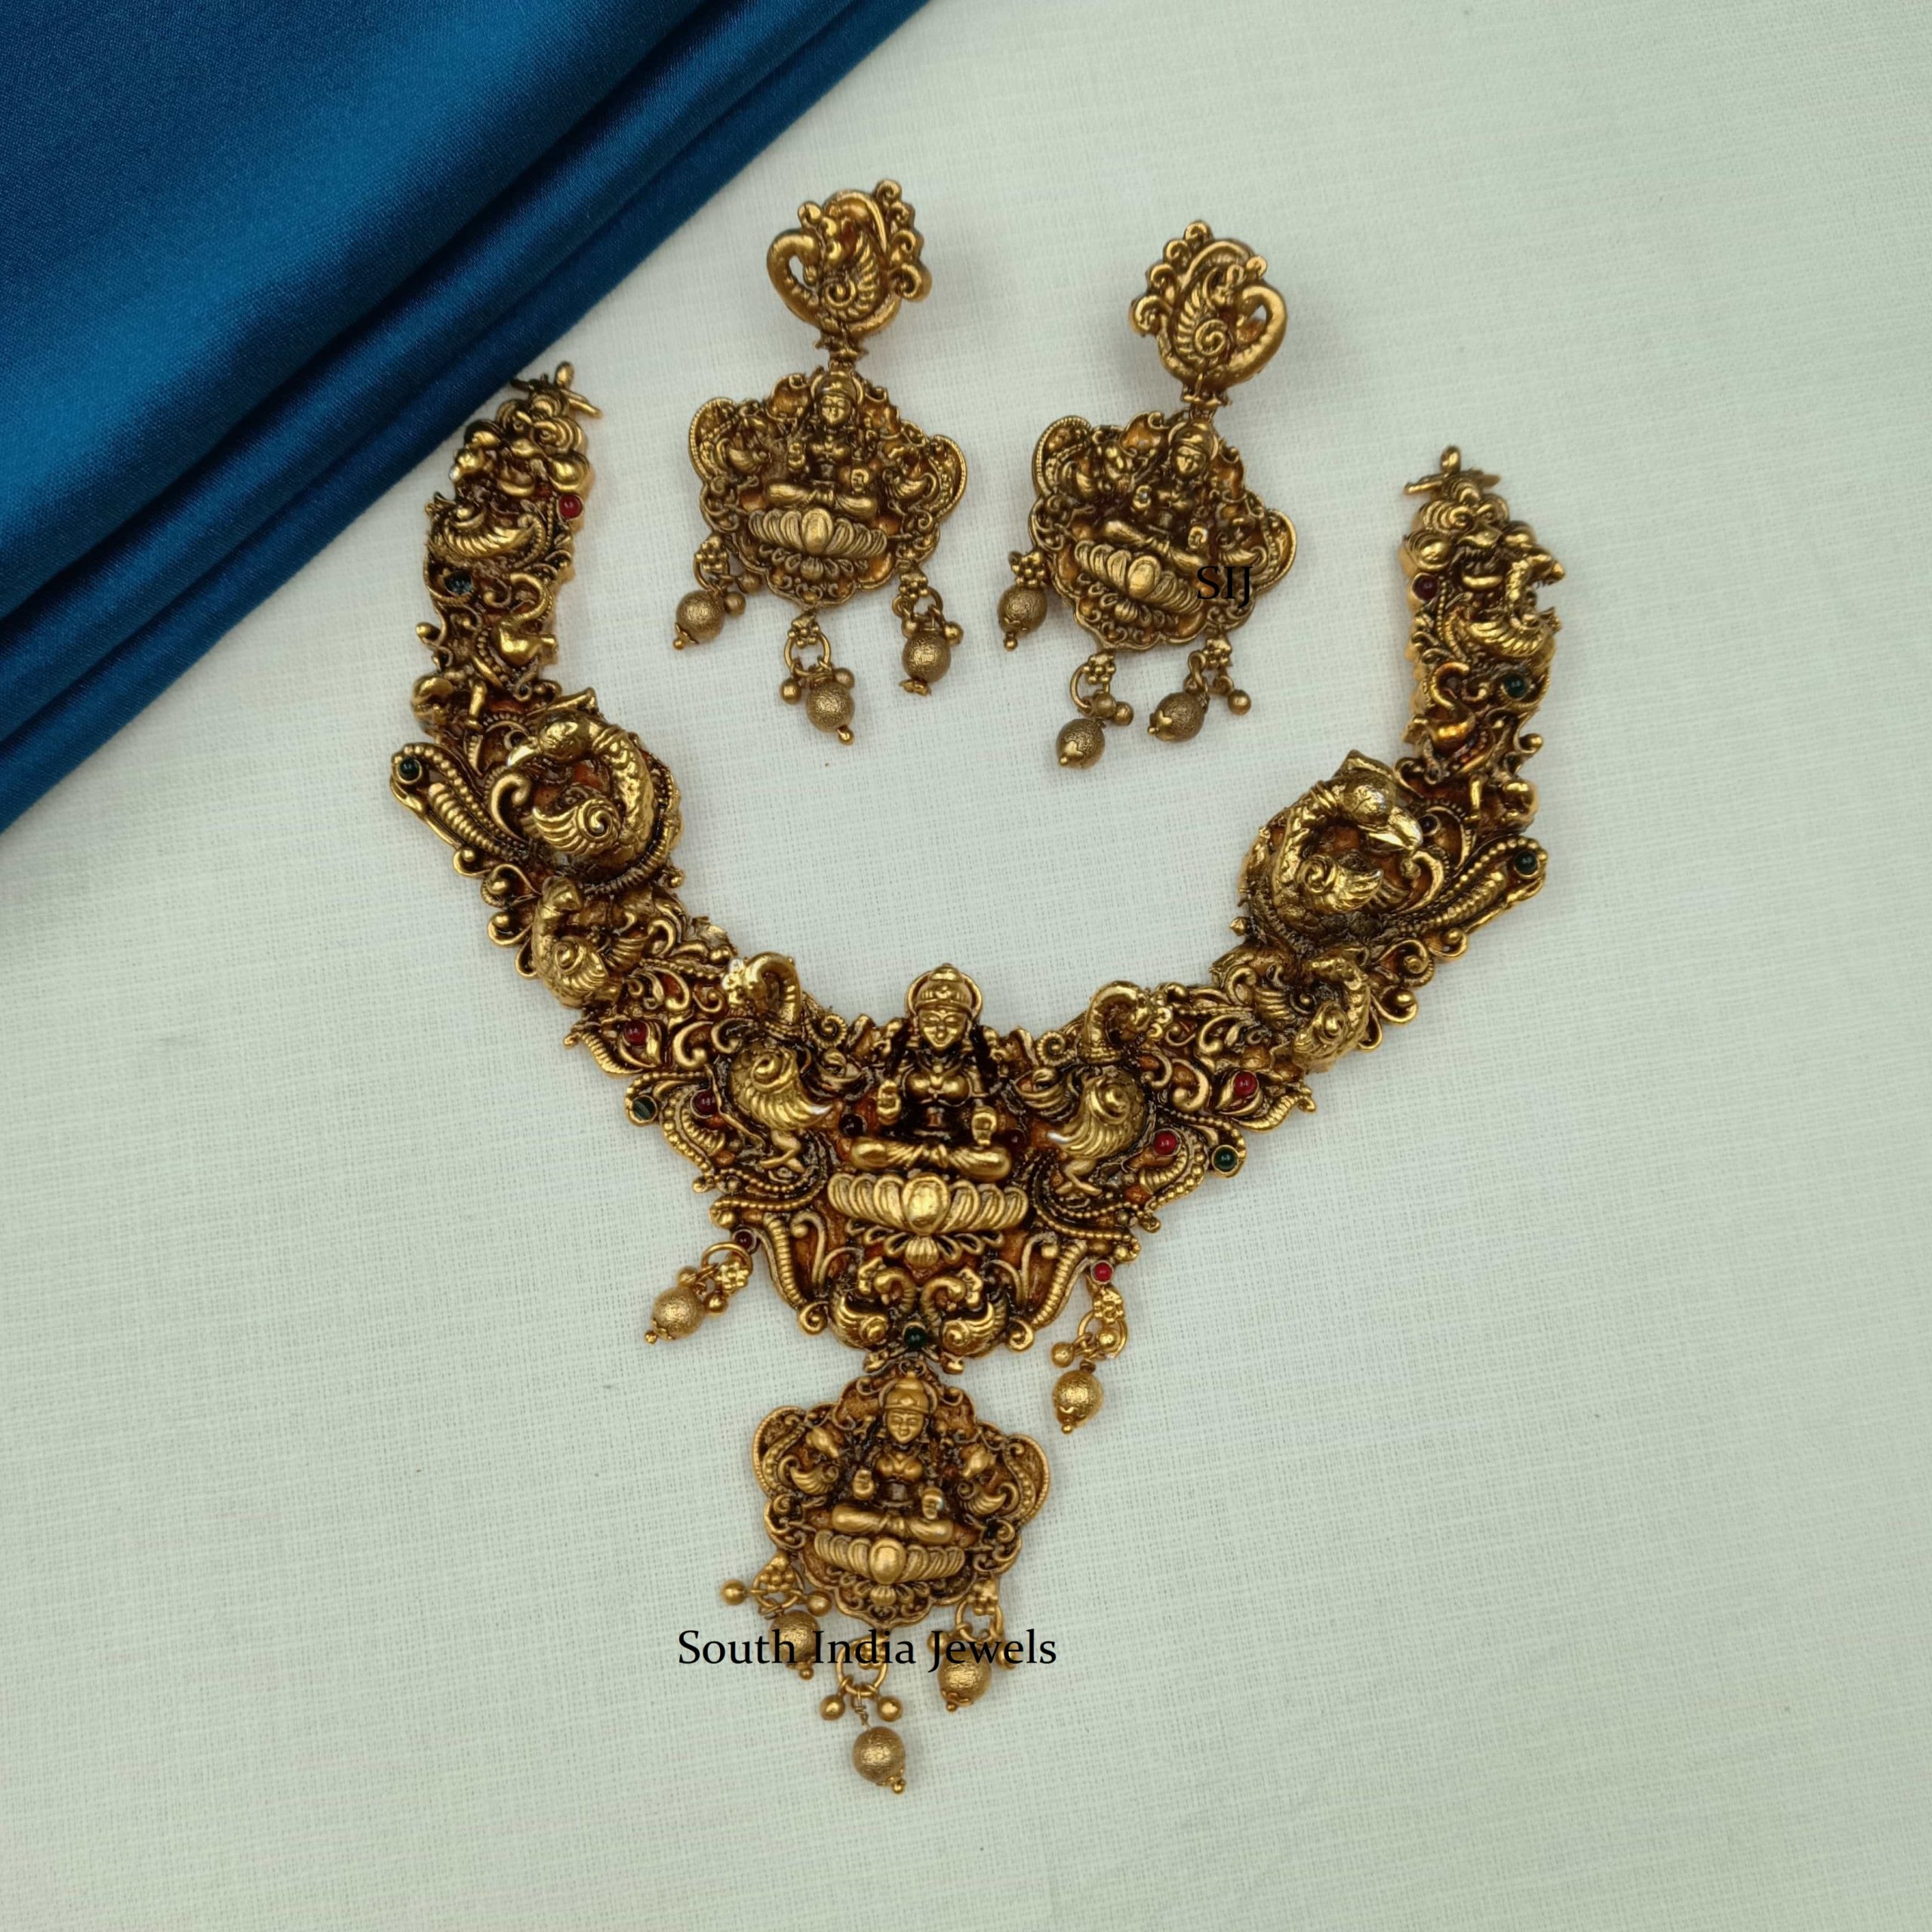 Antique Temple Goddess Necklace - South India Jewels